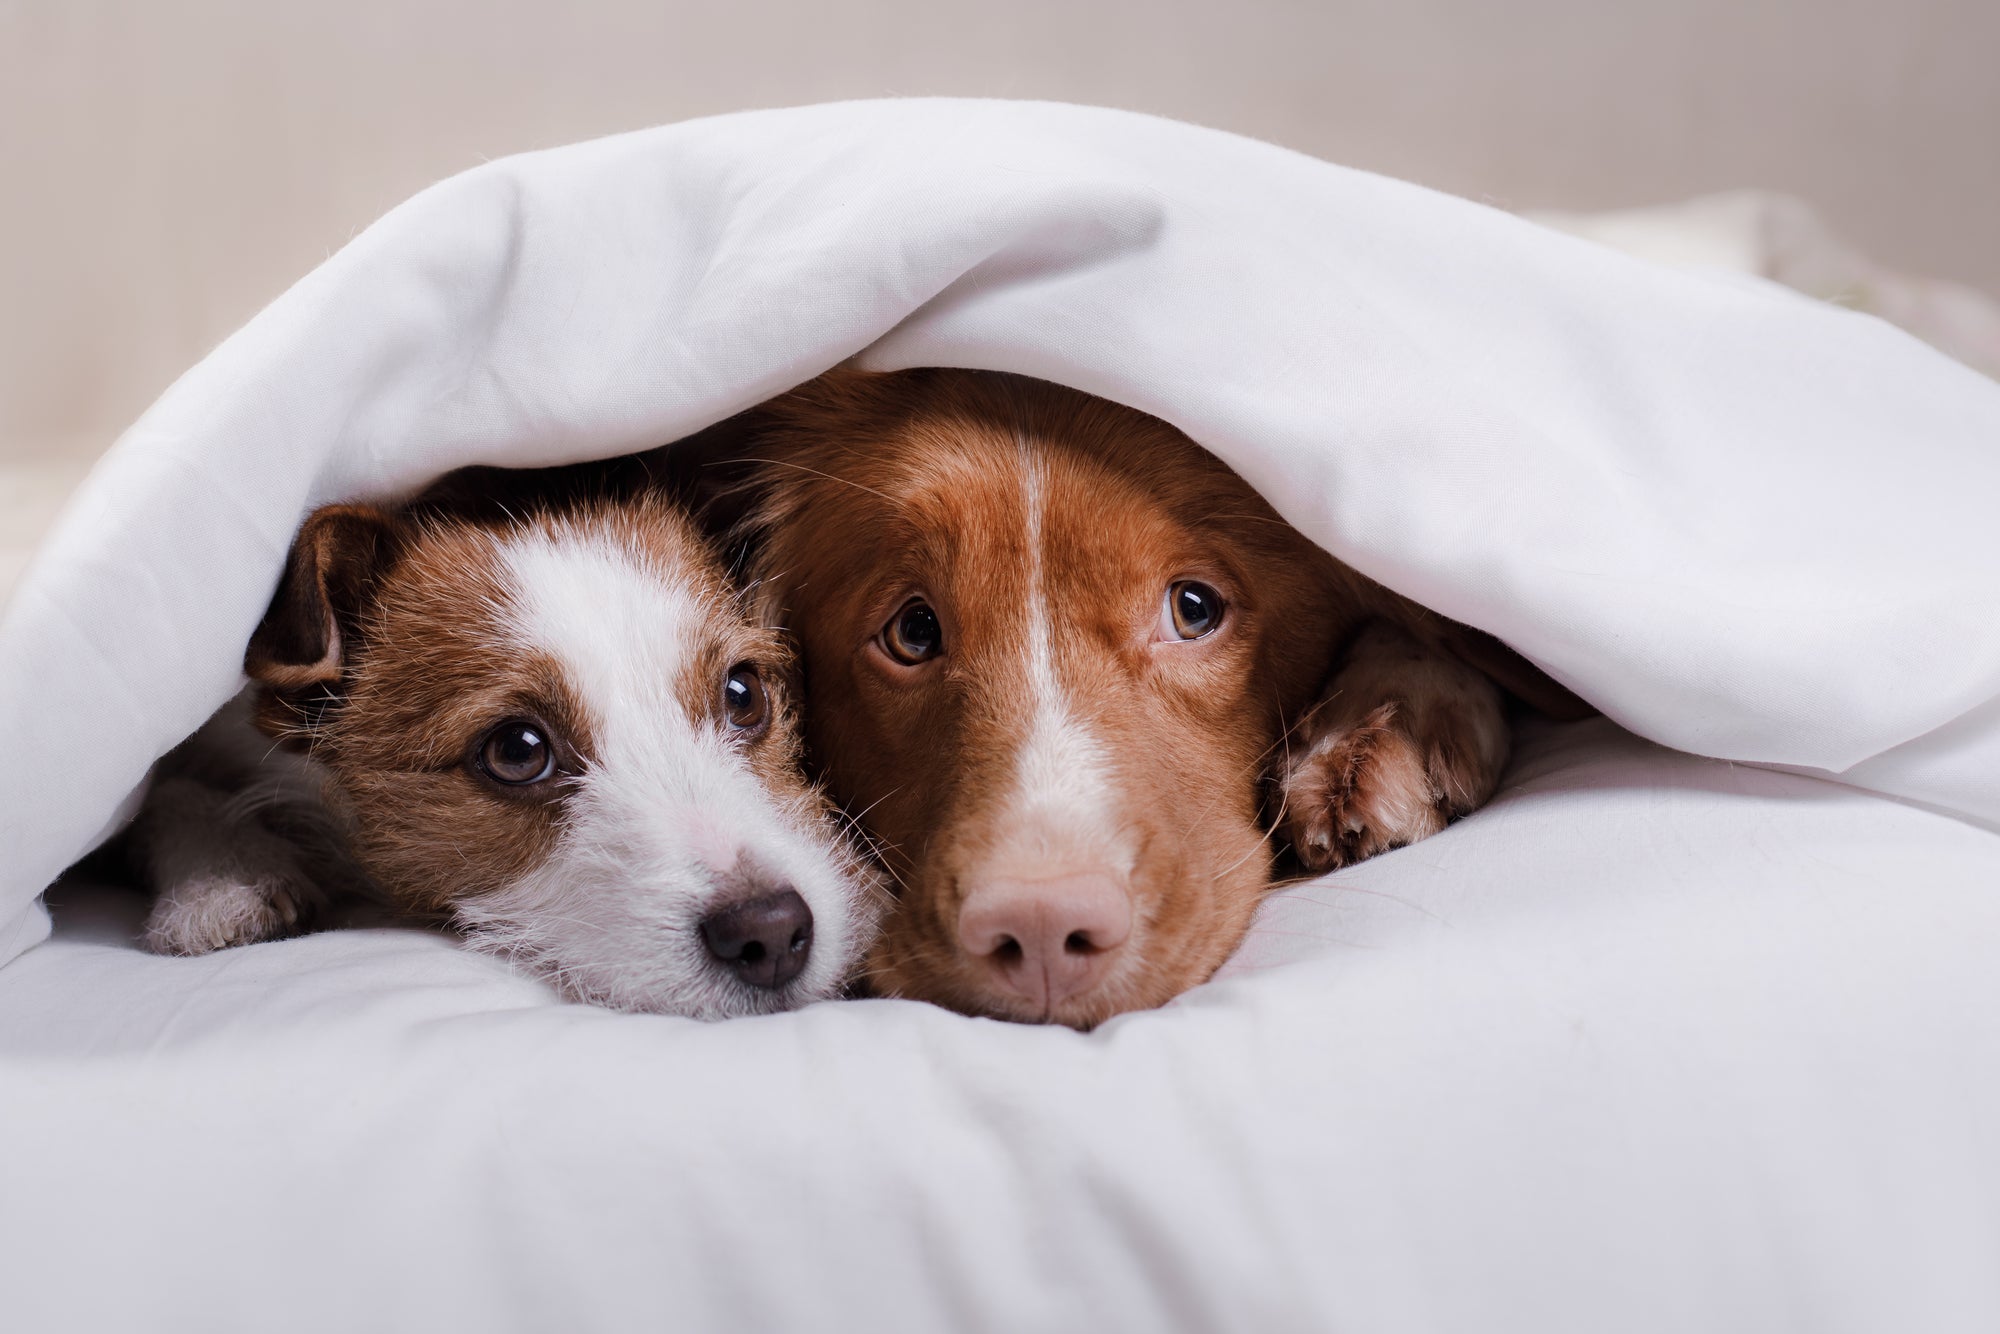 How to choose the right bed for your dog?